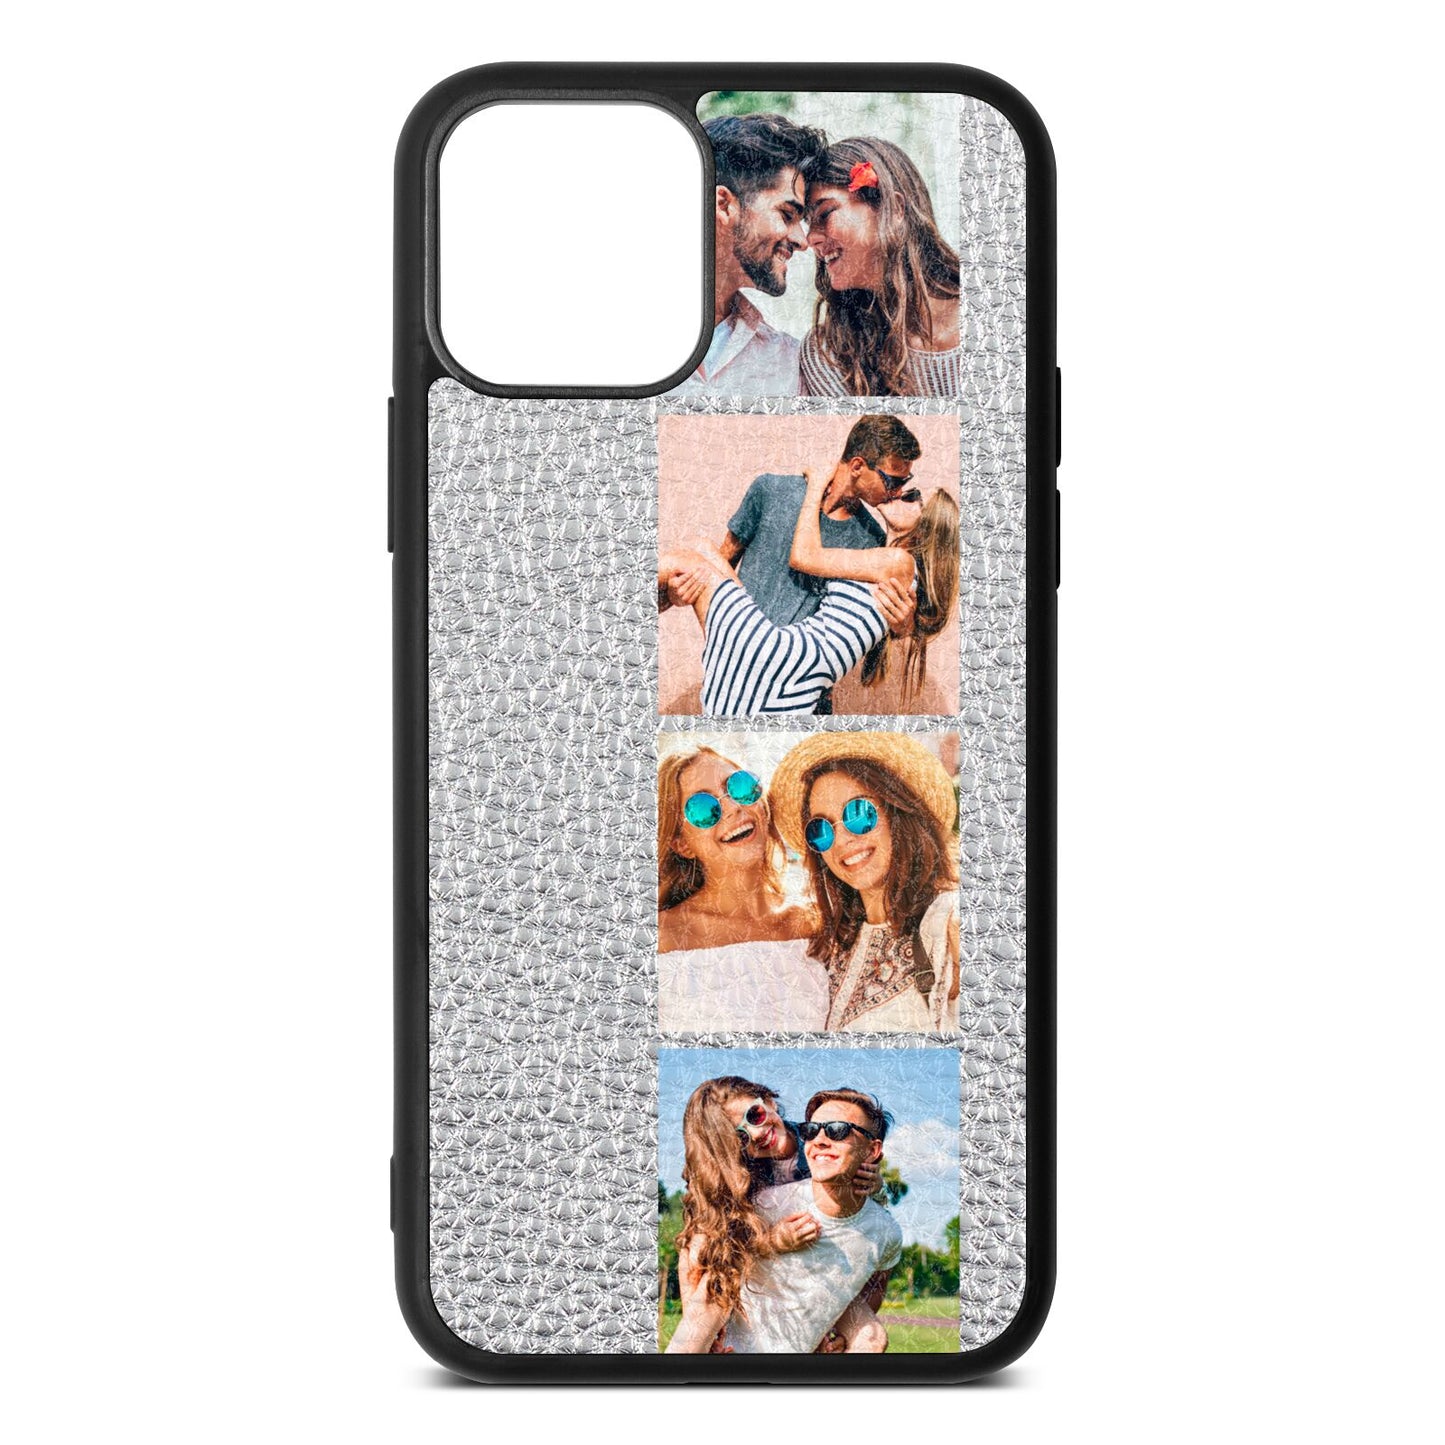 Photo Strip Montage Upload Silver Pebble Leather iPhone 11 Case